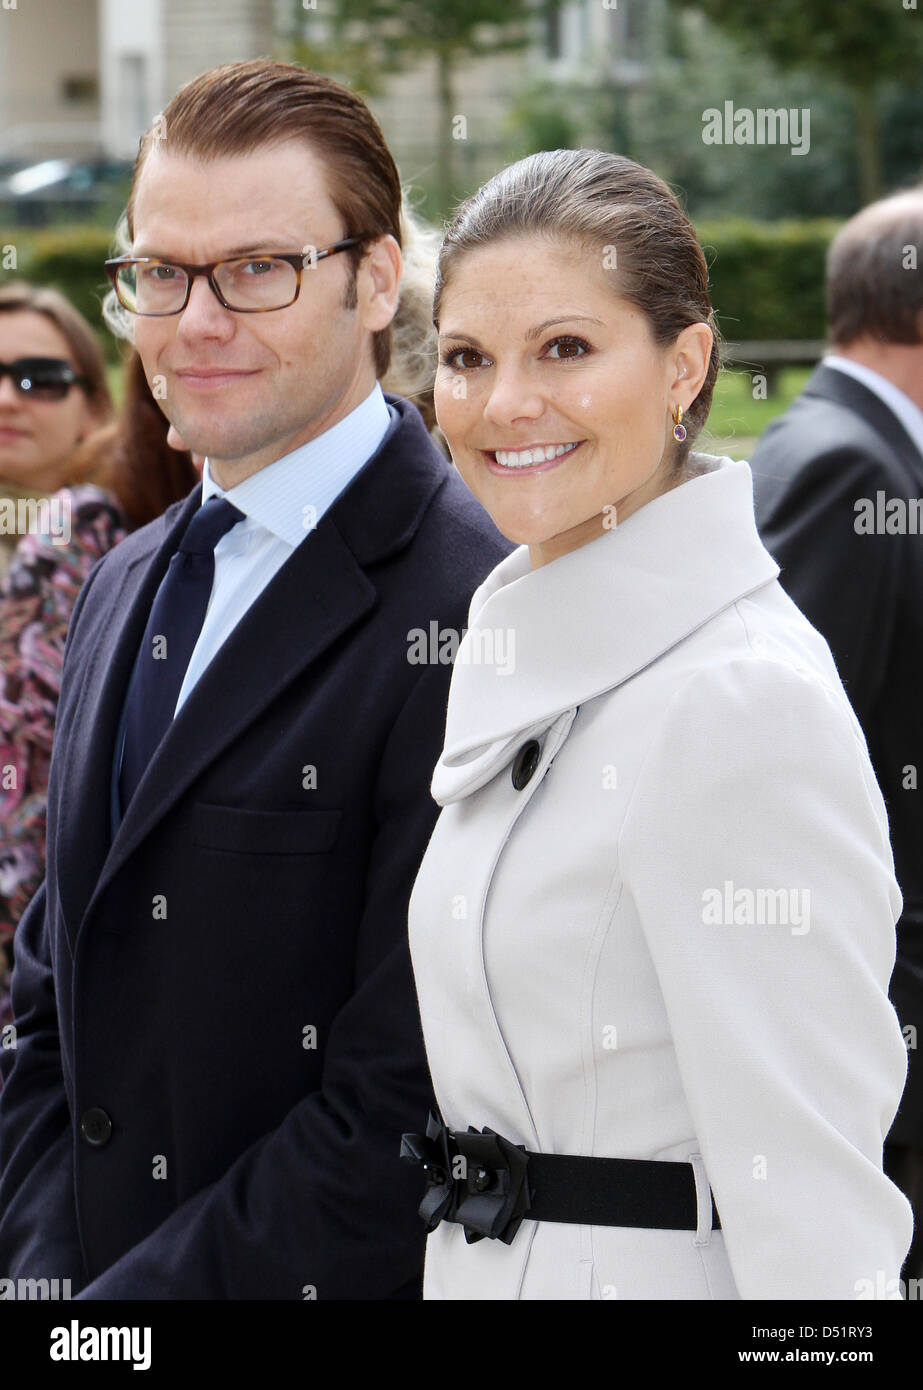 Crown Princess Victoria of Sweden and Prince Daniel Westling, Duke of Vastergotland, visit the "Chateau de la Grange" near Paris, France, 27 September 2010. The couple is staying in France for an official four-days visit. Photo: Patrick van Katwijk Stock Photo